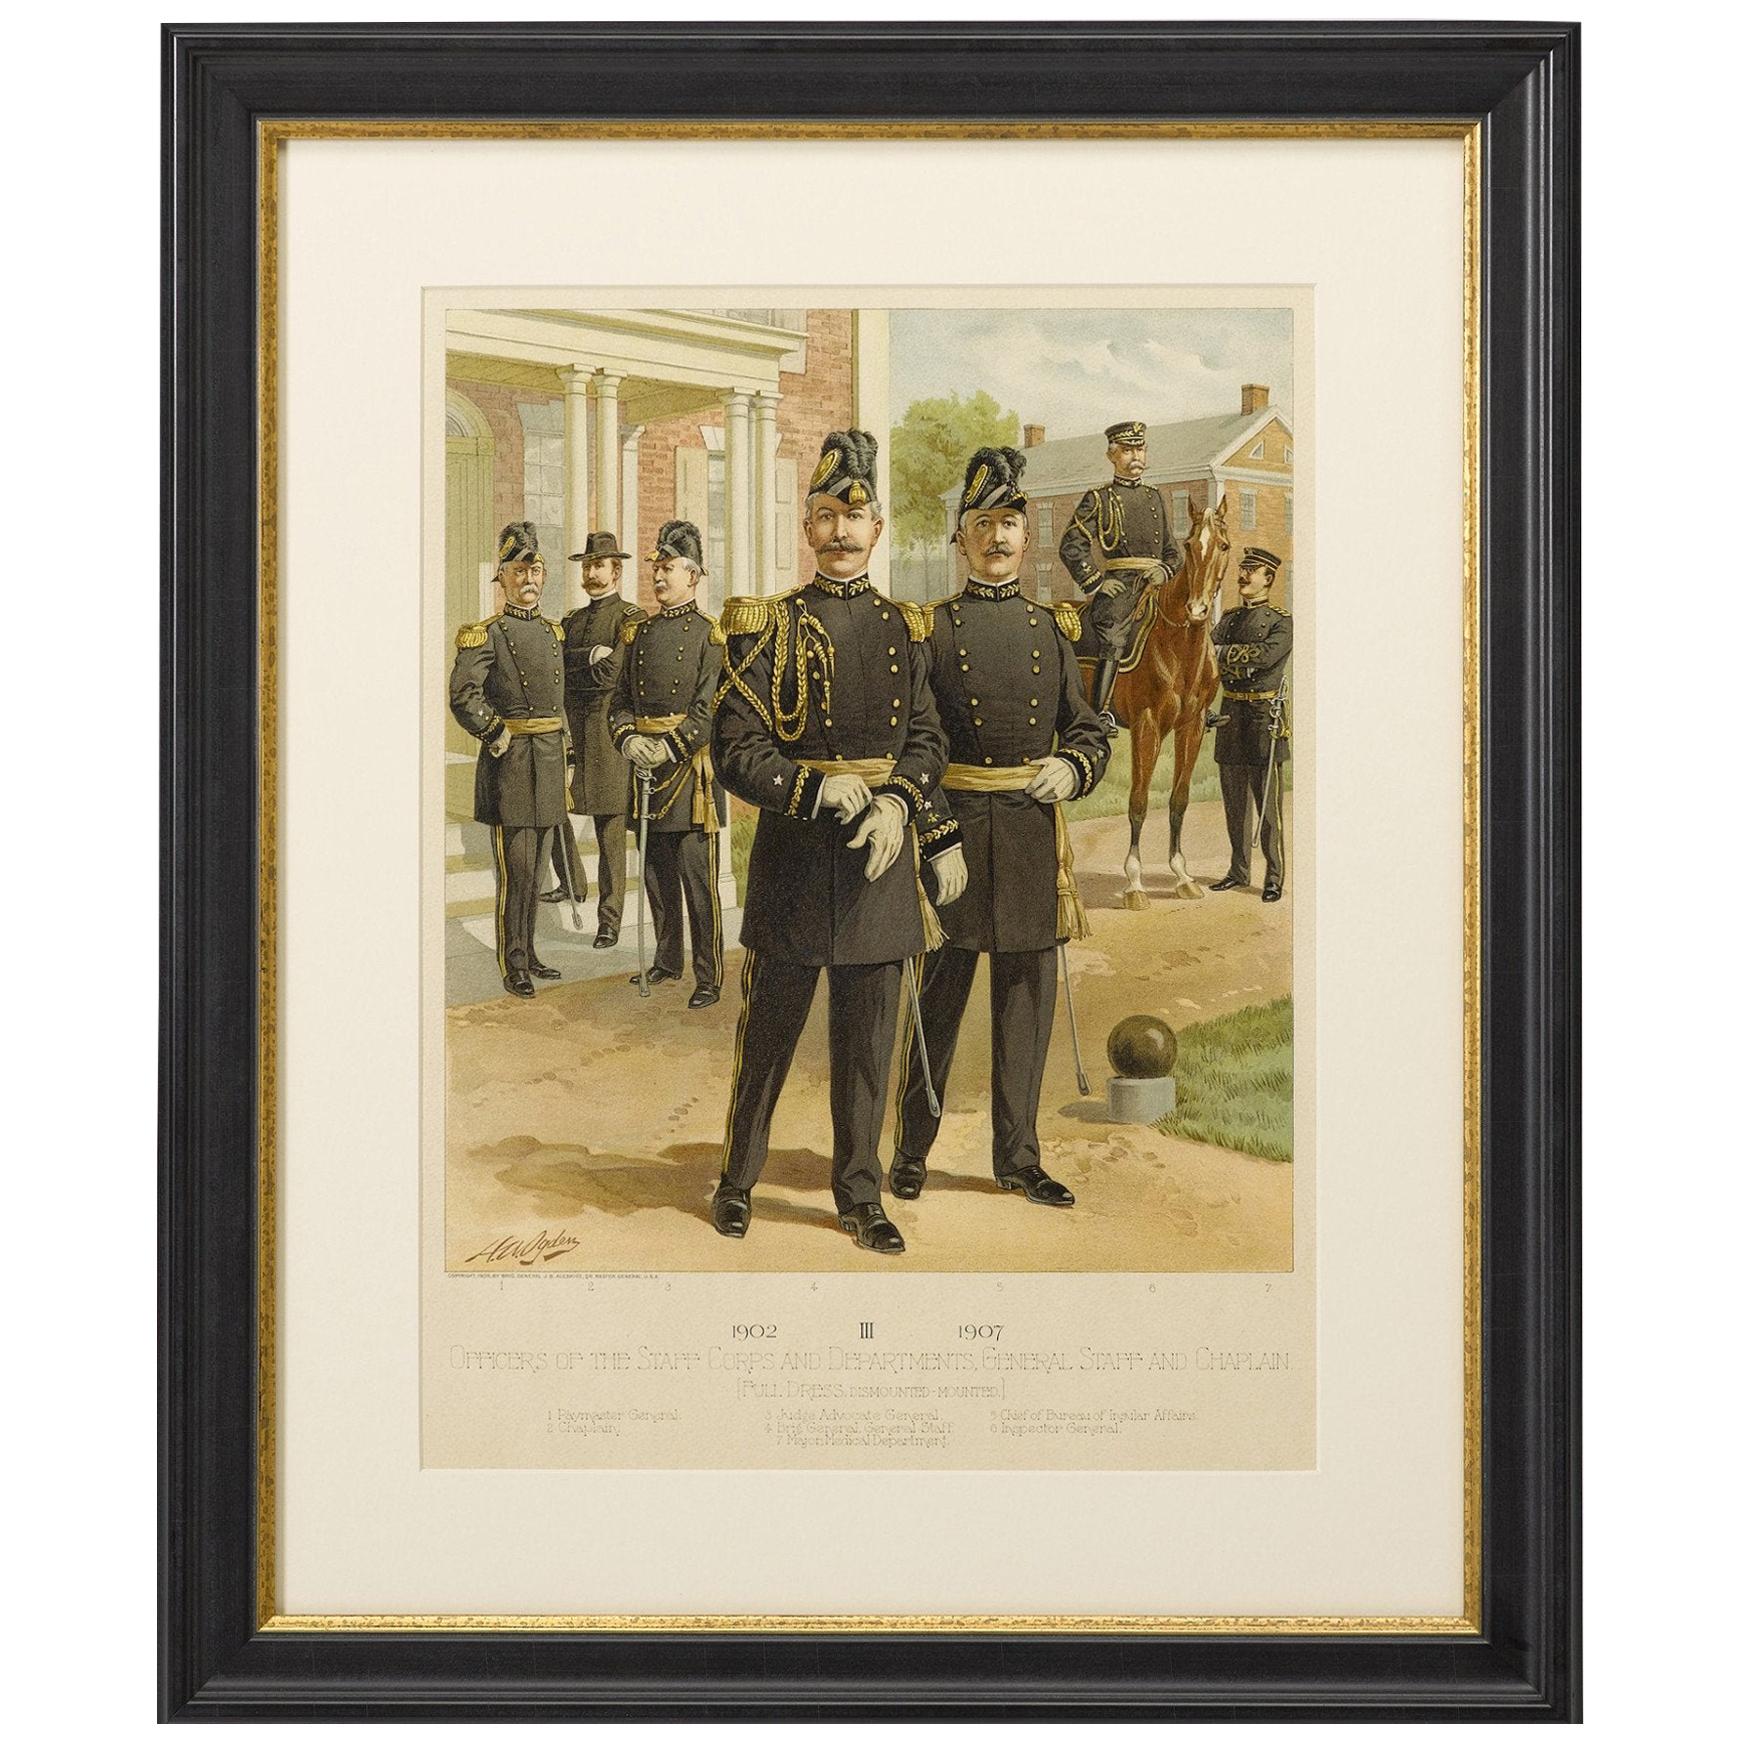 Original "1902-1907 Officers of the Staff Corps" by C. Ogden, 1908 For Sale